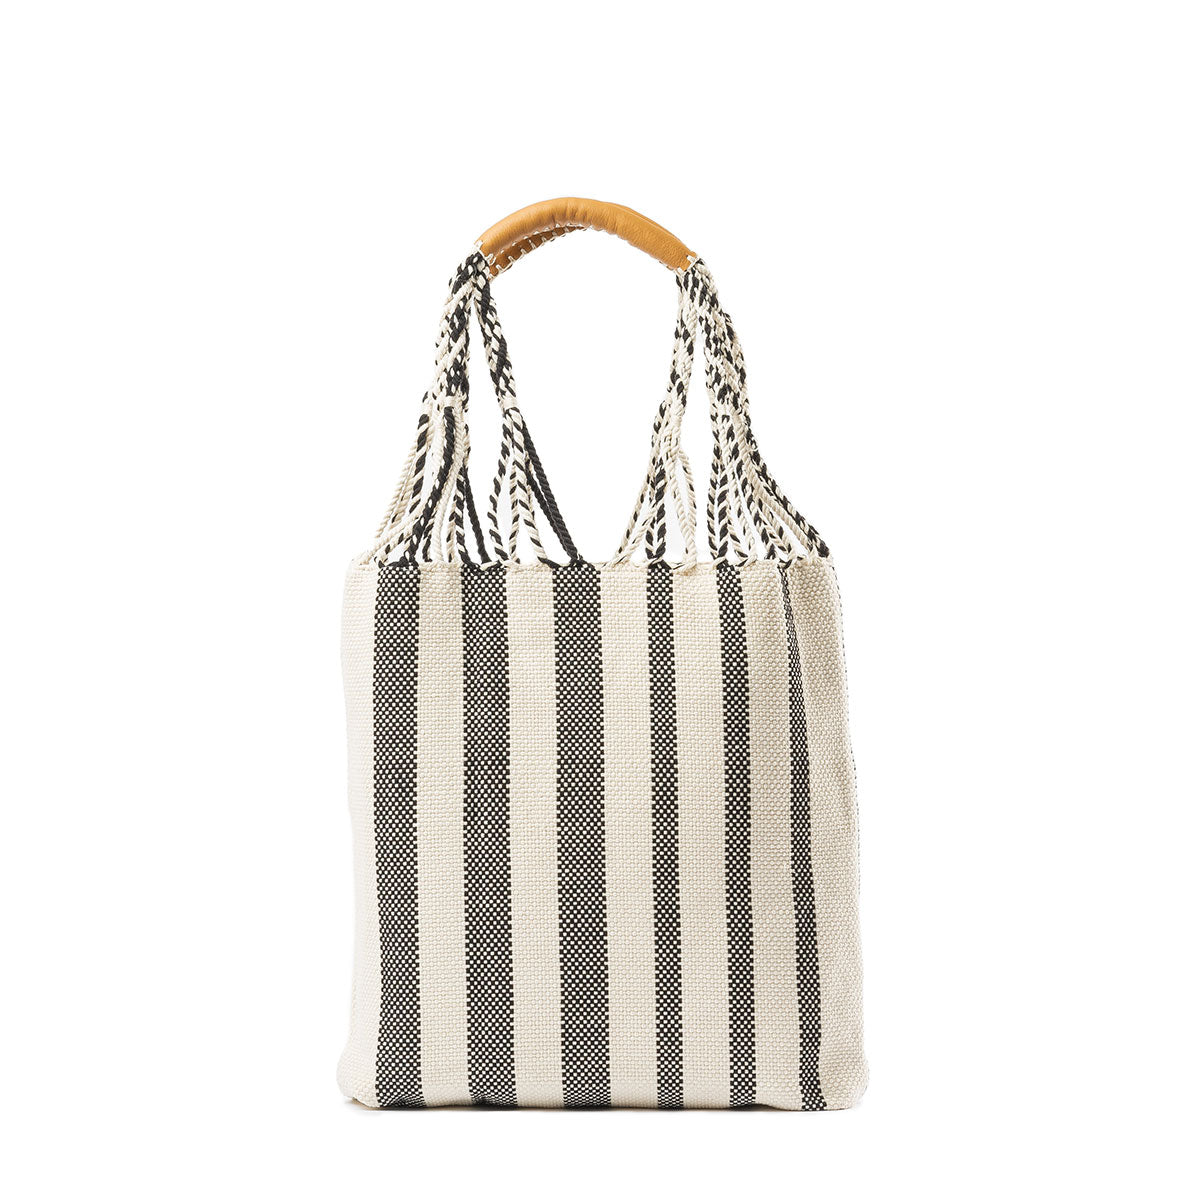 Apolonia Tote Tourmaline Basket Weave. The Apolonia has woven cords attached to leather handles. The Tourmaline pattern has vertical black and white stripes.